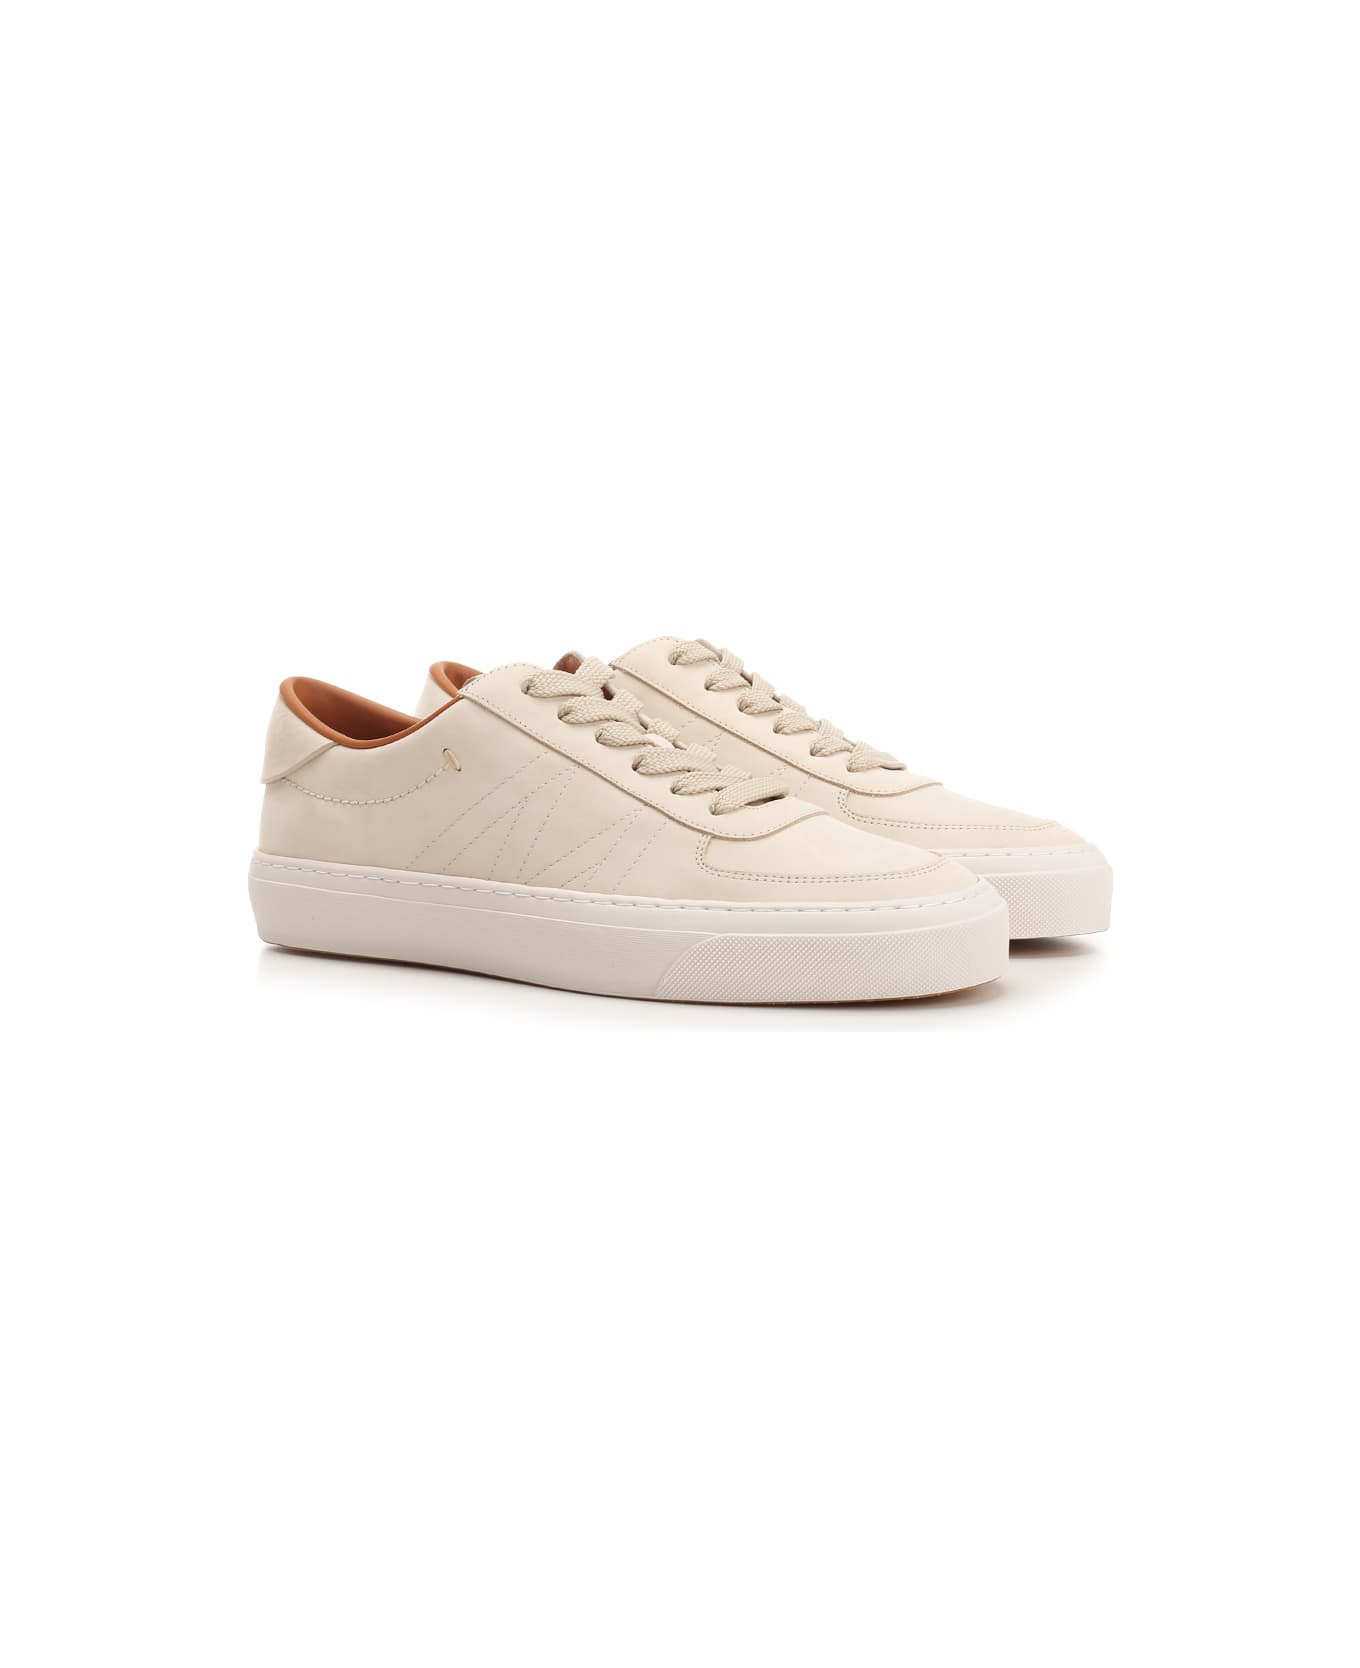 Moncler 'monclub' Low Sneakers In Leather スニーカー